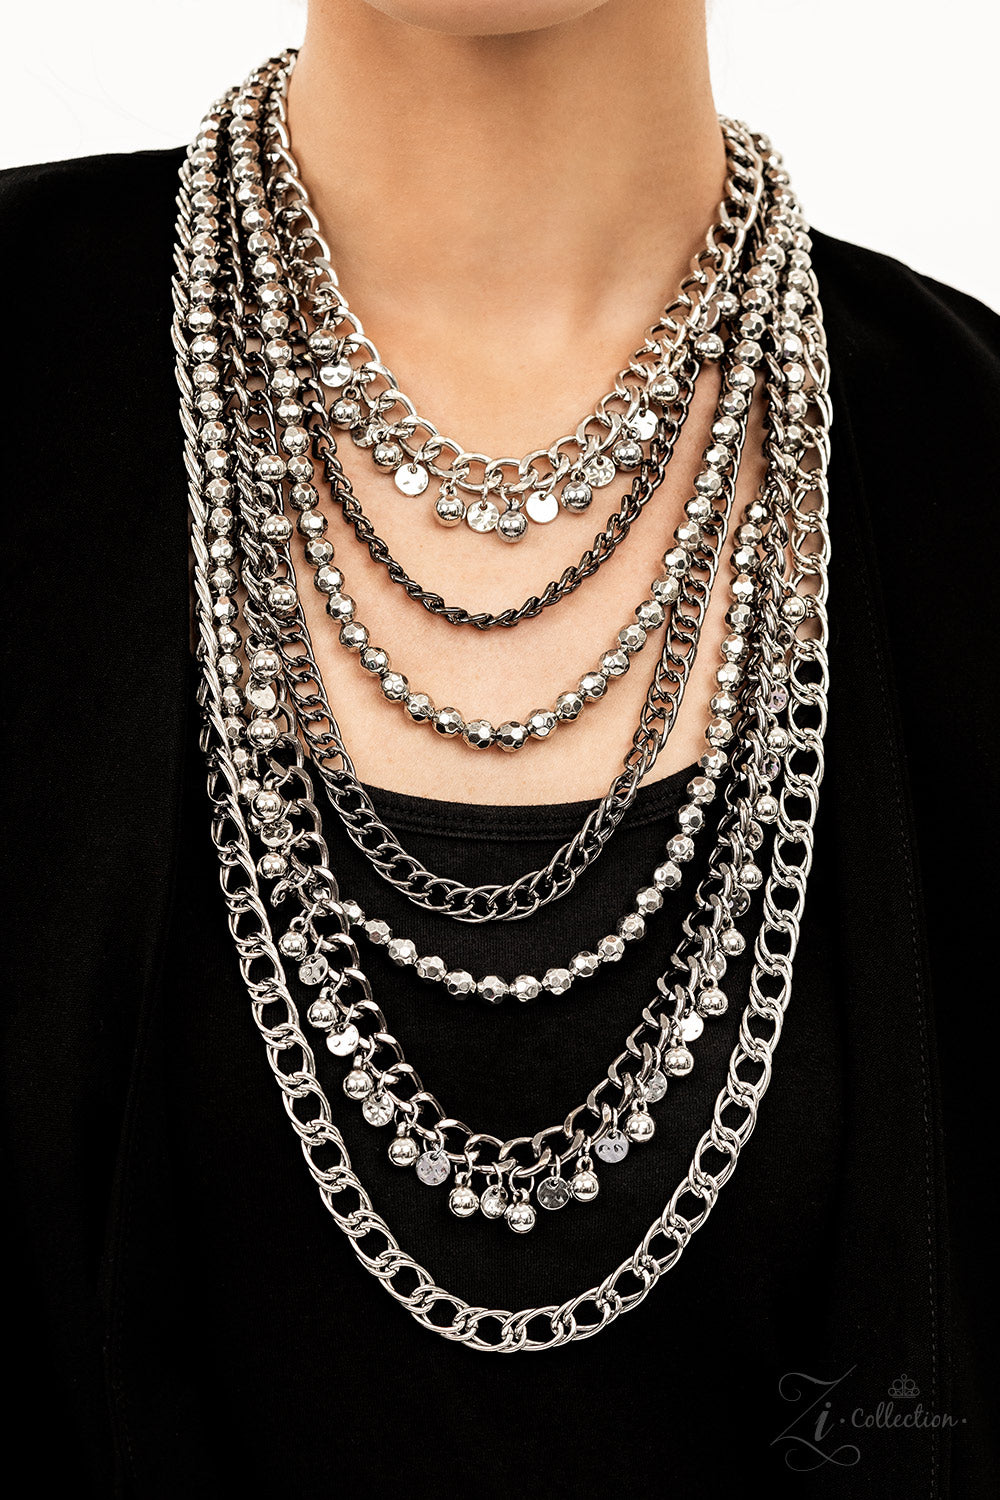 Paparazzi Accessories Audacious Featuring a range of oval and curb style links, a chaotic assortment of bulky silver and gunmetal chains fearlessly layers down the chest. Polished silver beads and textured silver discs swing from the thick curb chains, in